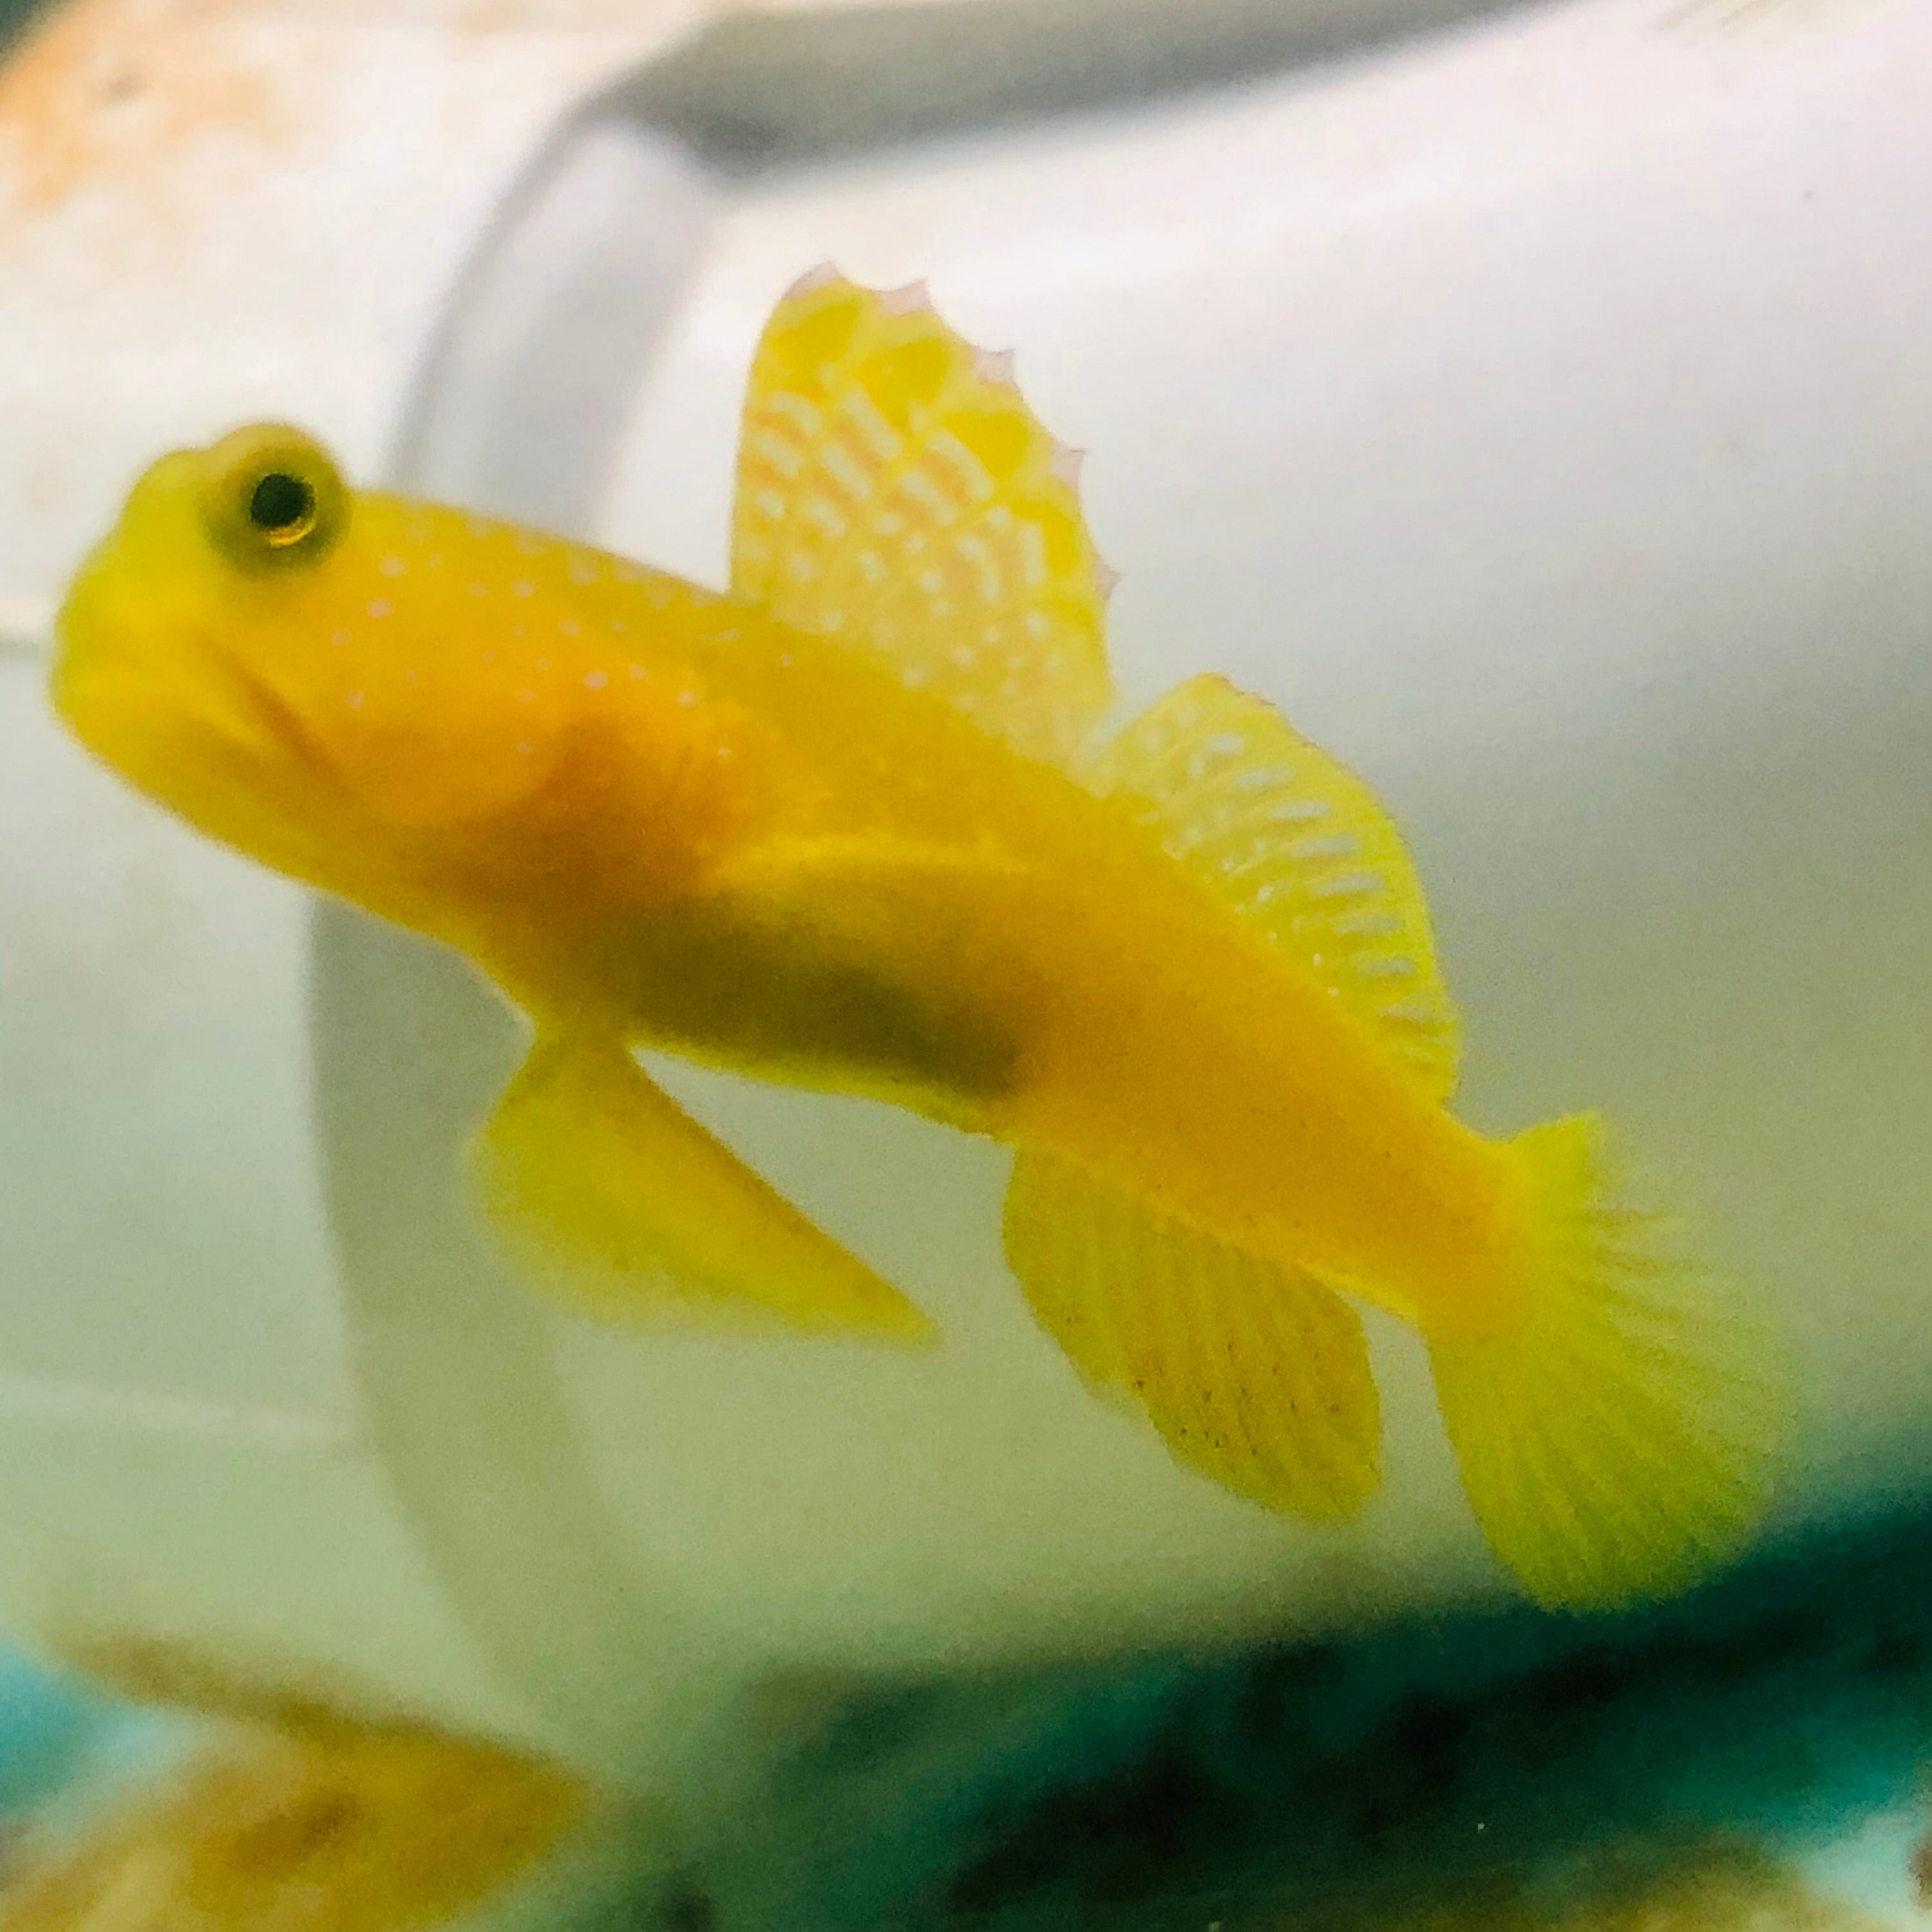 Aquarium Conditioned-Yellow Watchman Goby